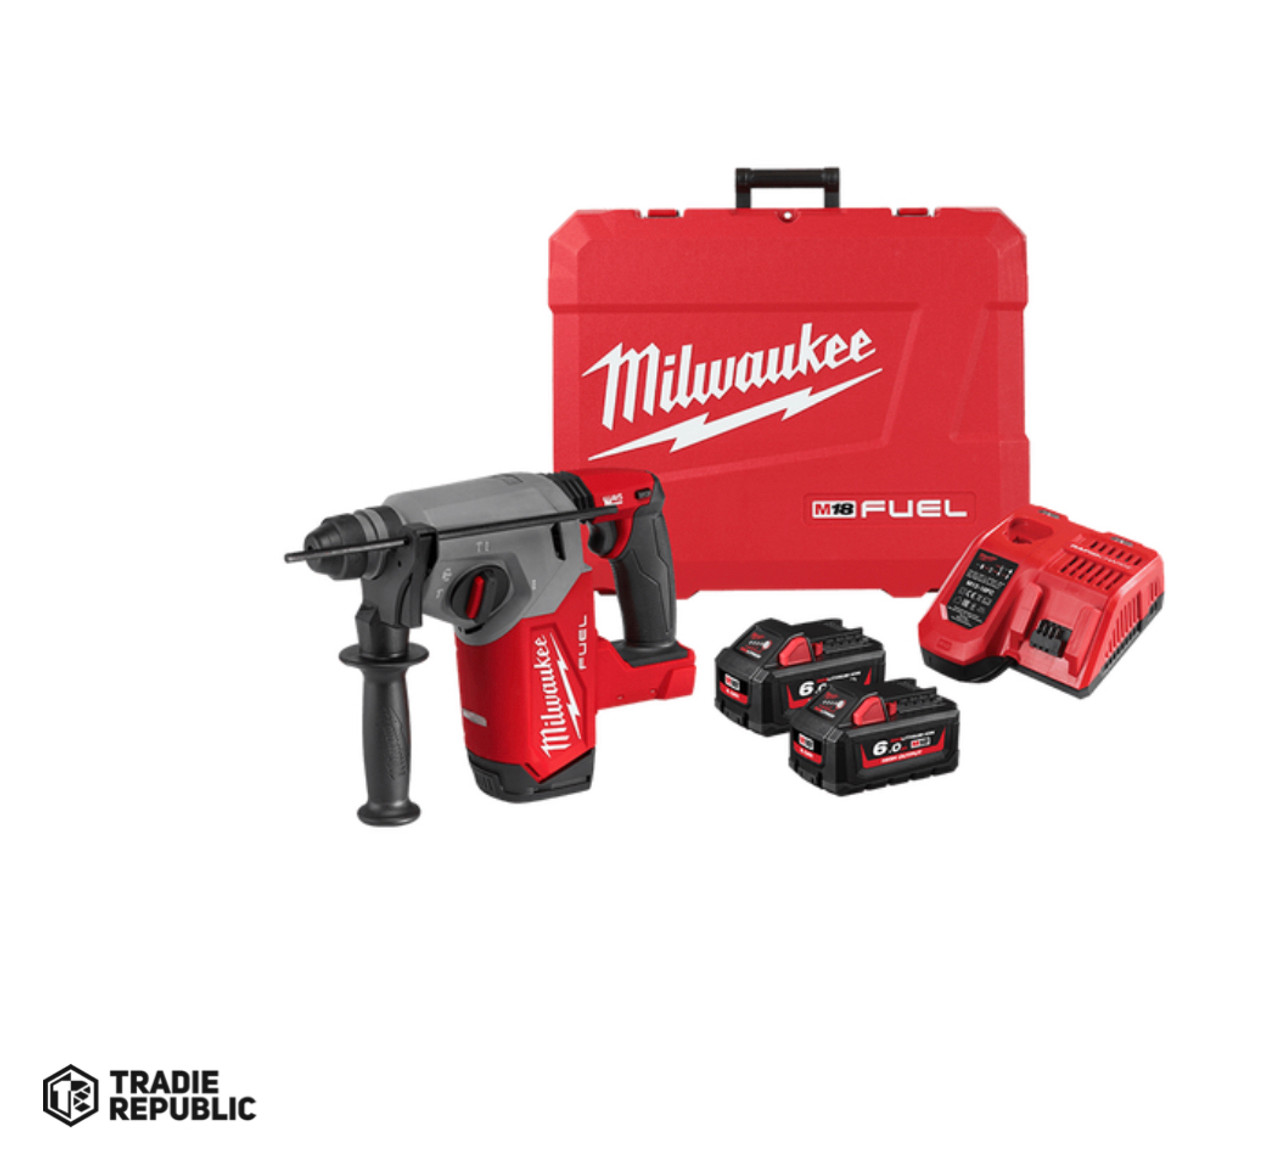 M18FH-602C Milwaukee M18 FUEL™ 26mm Rotary Hammer Kit includes 2x 6.0Ah Redlithium Batteries, Charger, Carry Case